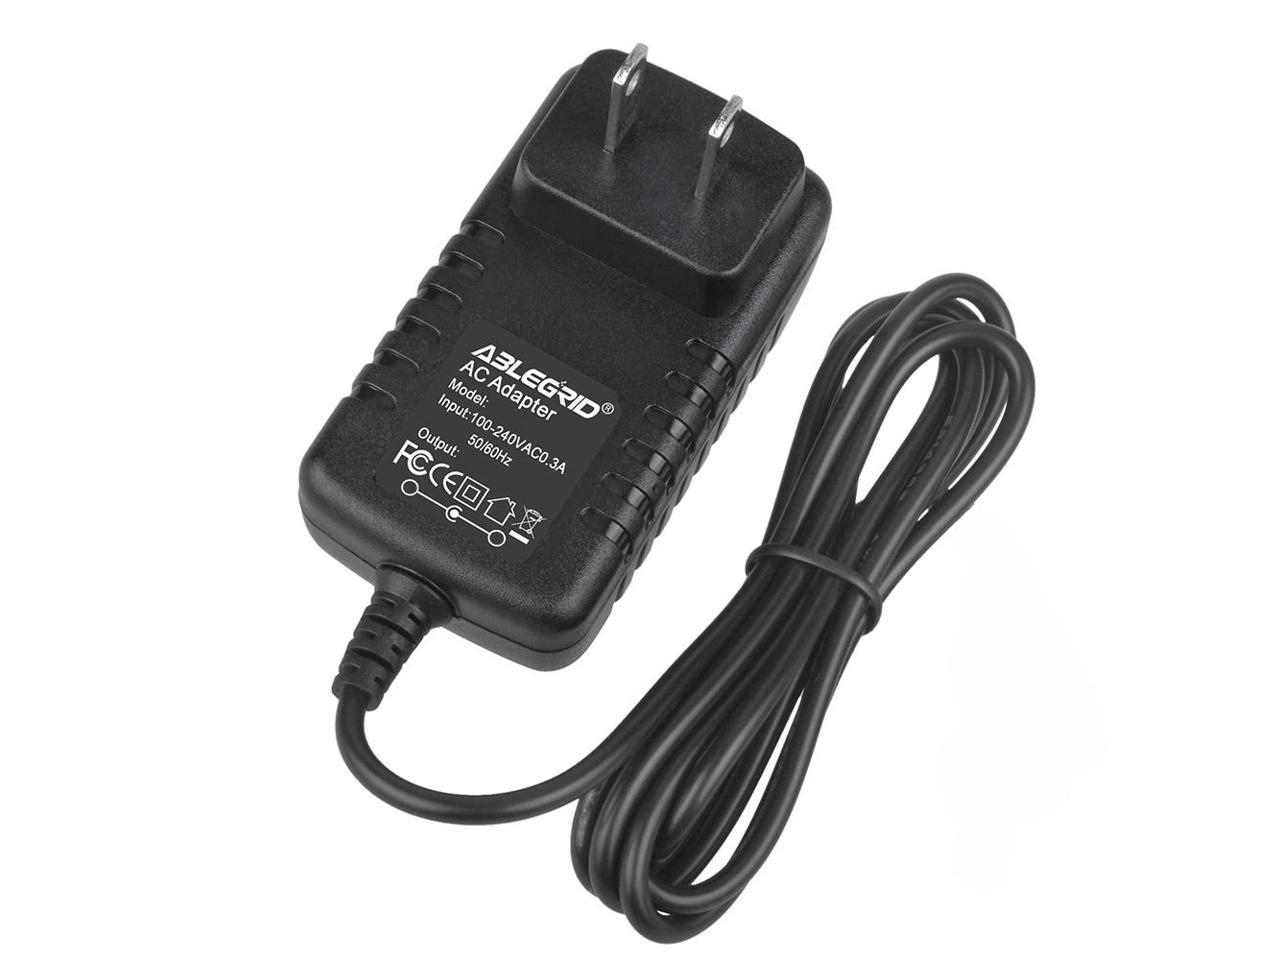 JKY36-SP0503000 Power Supply Cord Wall Home Charger PSU AC Adapter for Model 